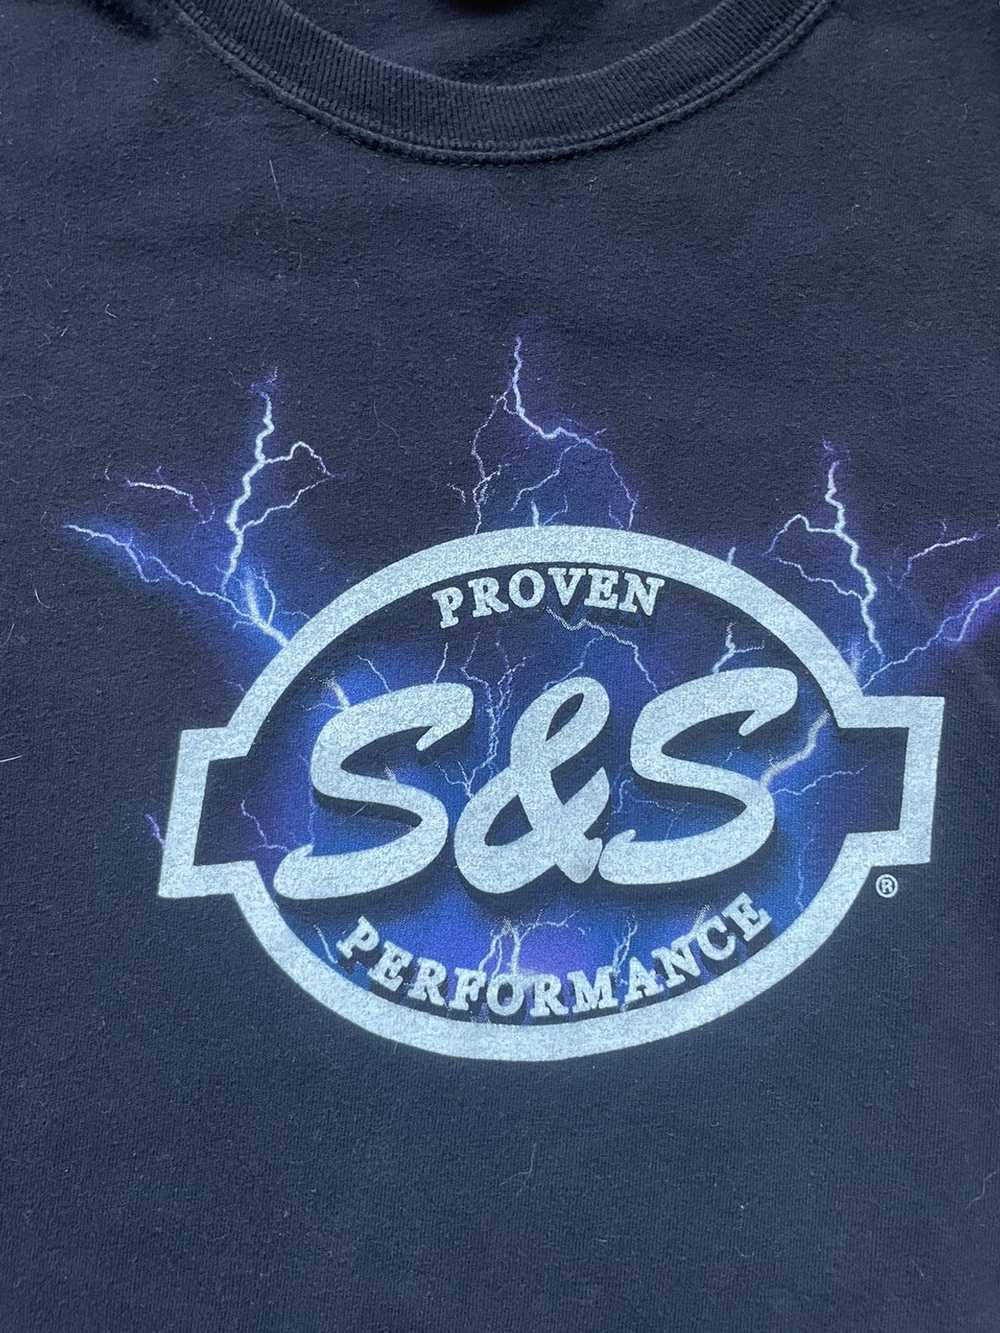 Hanes S&S proven performance Long Sleeve - image 3